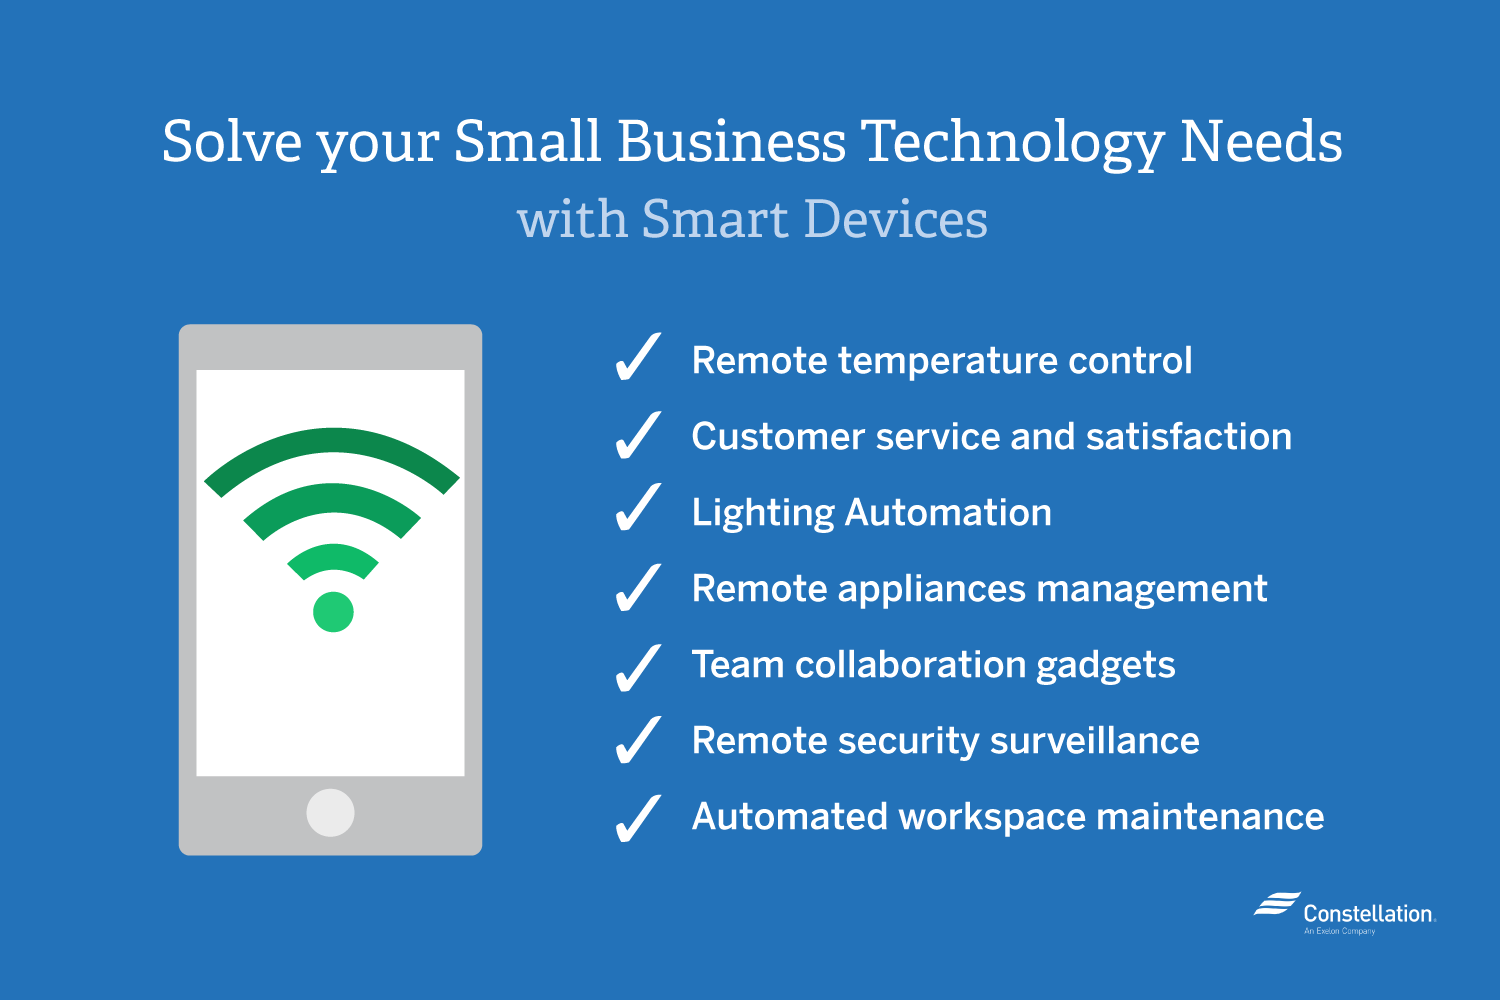 You can solve your small business technology needs with smart devices to remotely control temperature, etc.